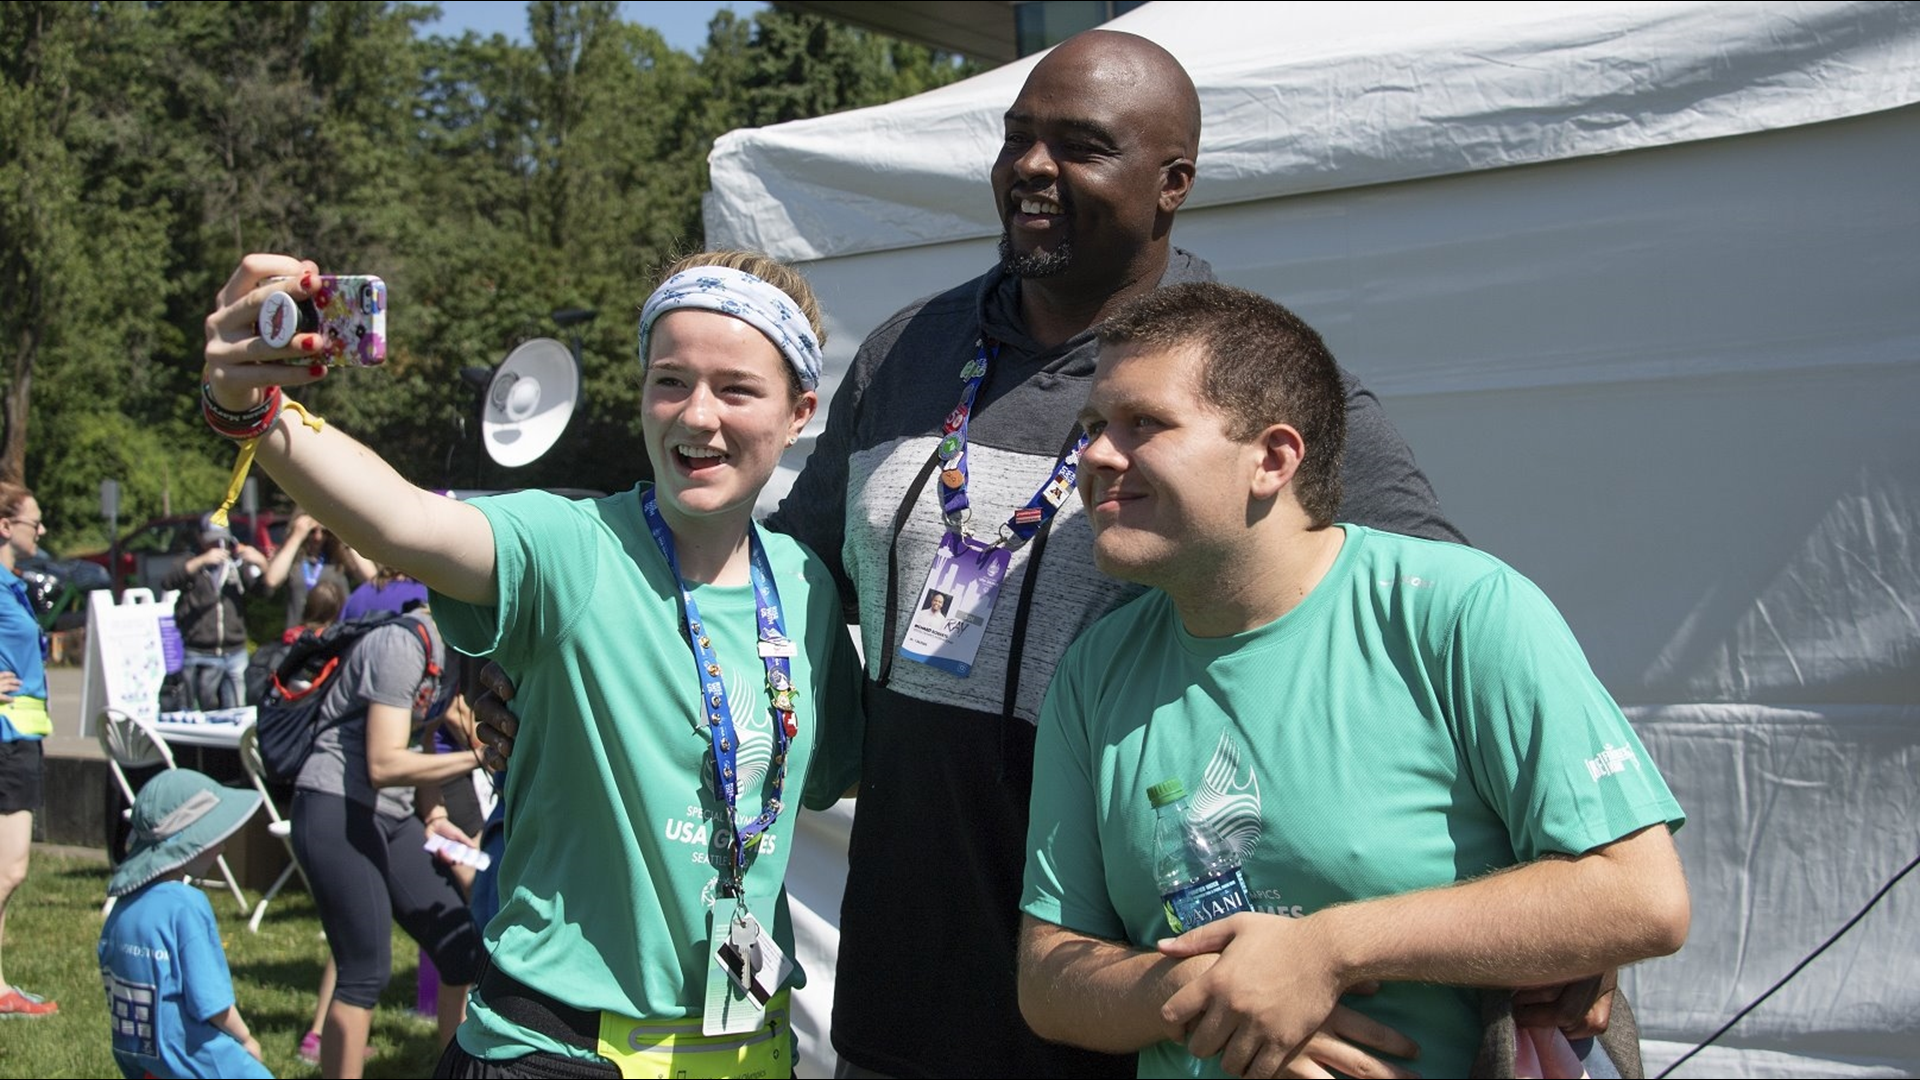 Special Olympics Washington's Day of Inclusion is a funfilled day of